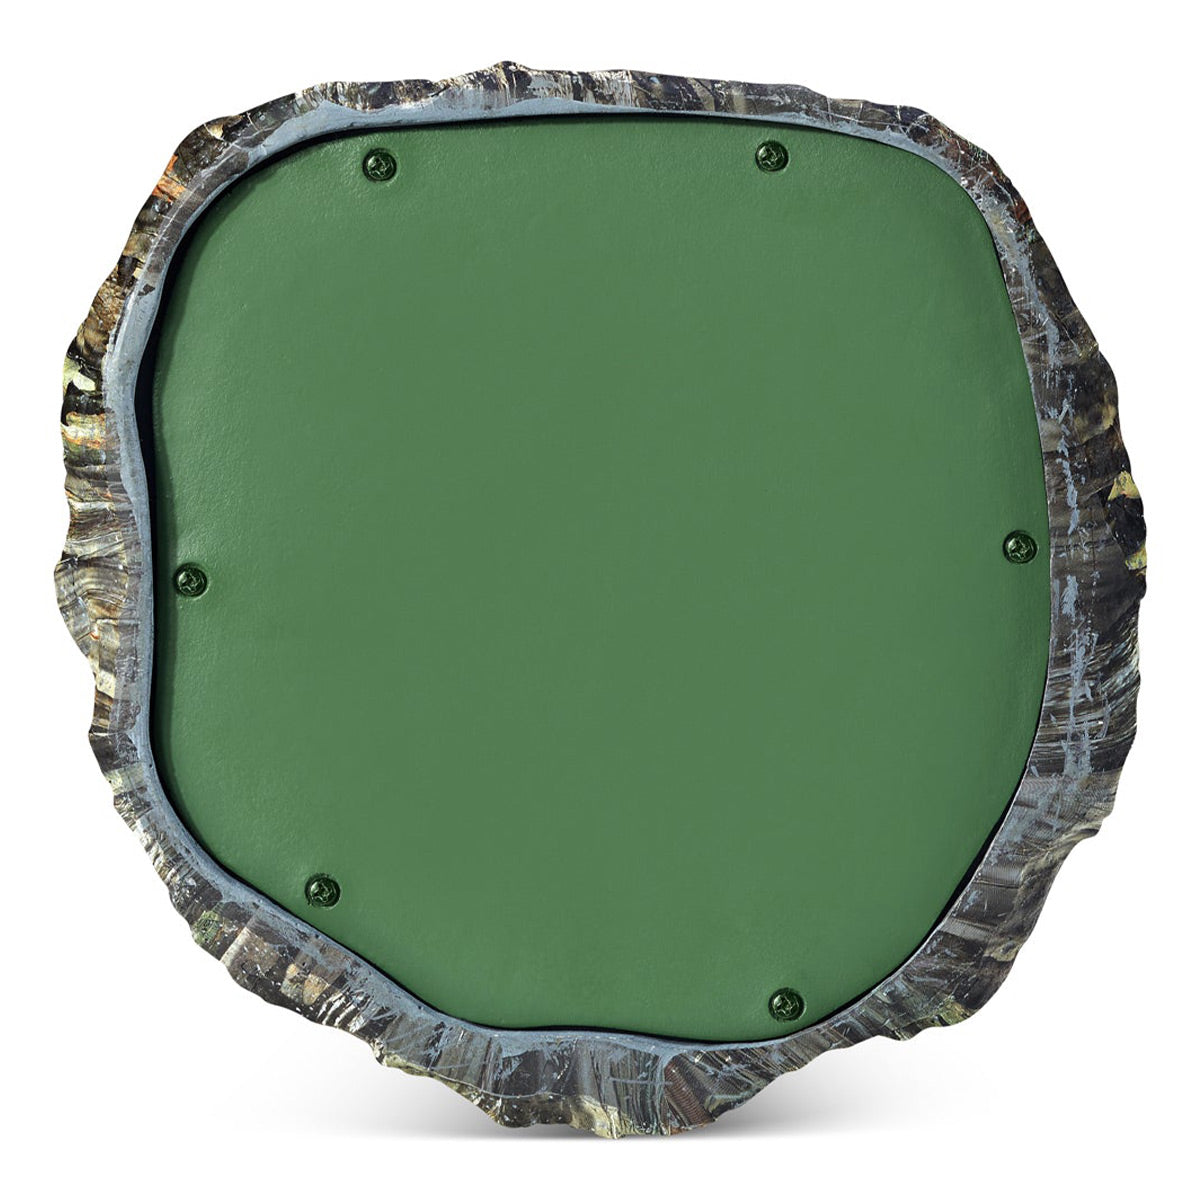 iHome iHRK-400MOBC-PR Rechargeable Bluetooth Outdoor Mossy Oak Break-up Country Camo Rock Speakers with TWS Linking - Pair